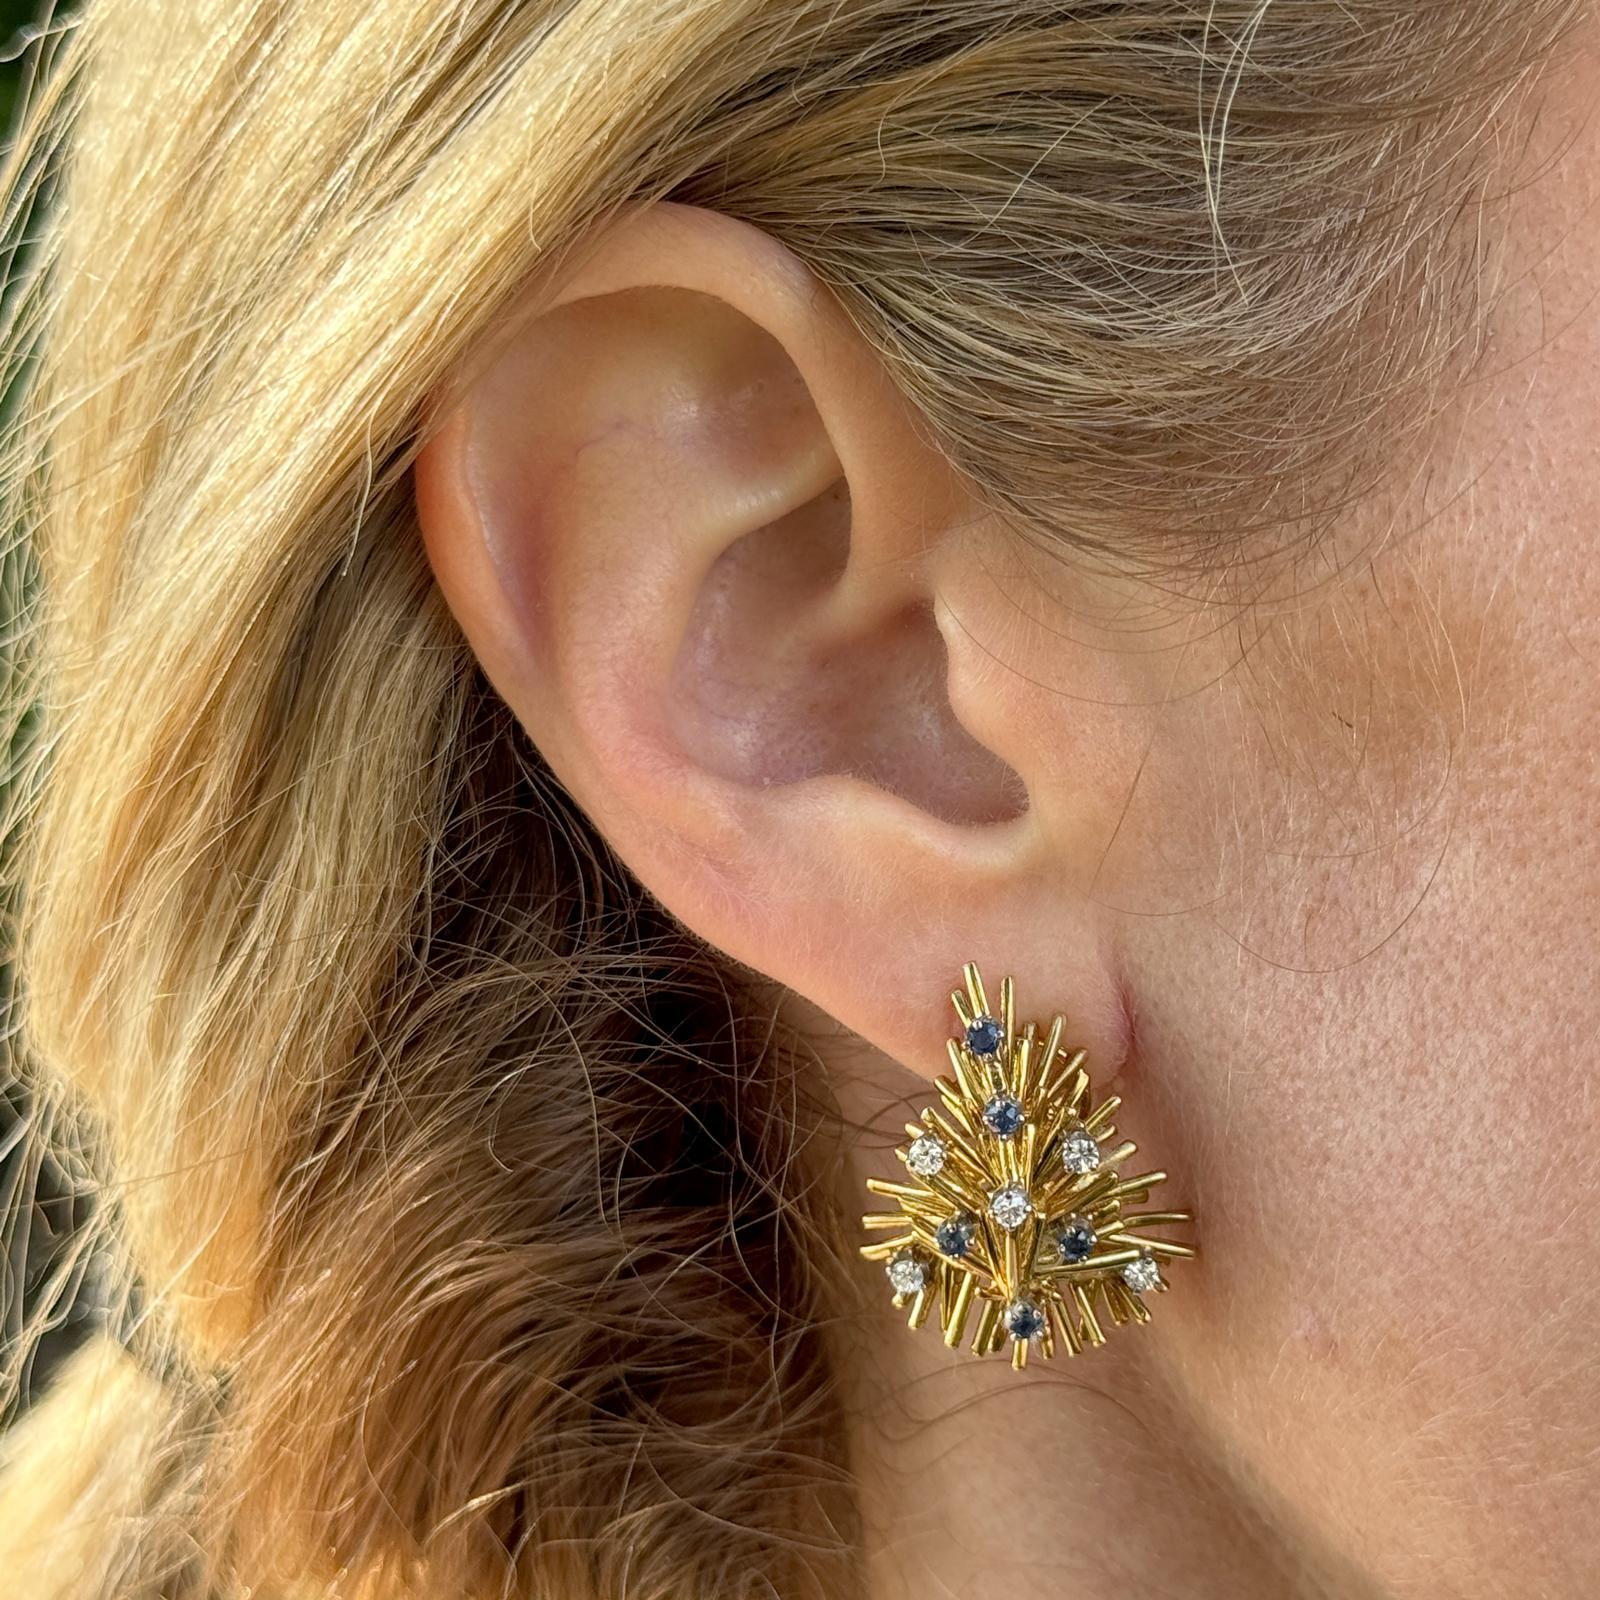 The diamond and sapphire earrings feature a spray design, typical of the 1960's vintage style. Fashioned in 18 karat yellow gold, these earrings boast a rich and luxurious metal setting that perfectly complements the diamonds and sapphires.  The